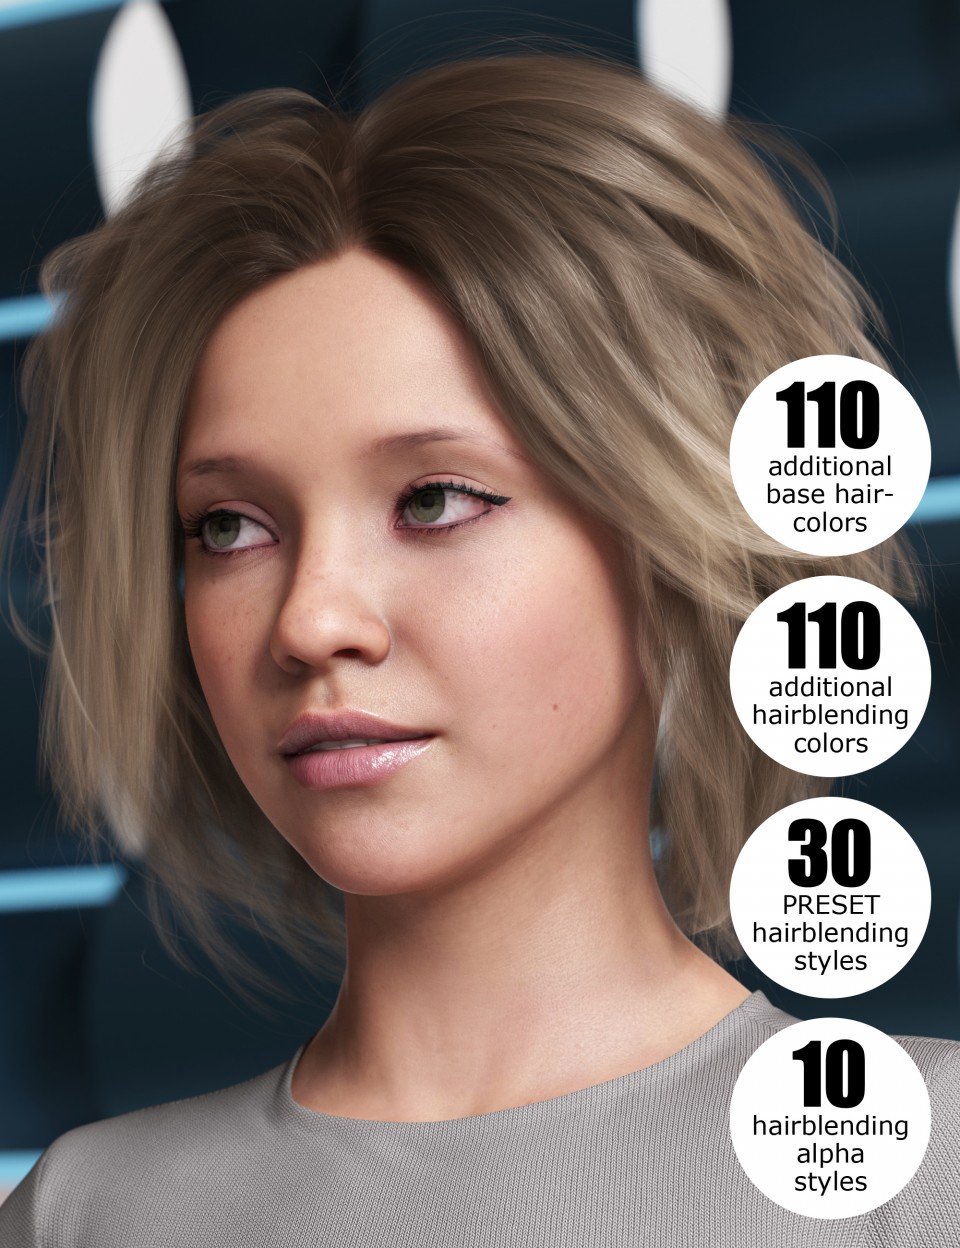 OOT Hairblending 2.0 Texture XPansion for Various Age Bob Hair_DAZ3D下载站